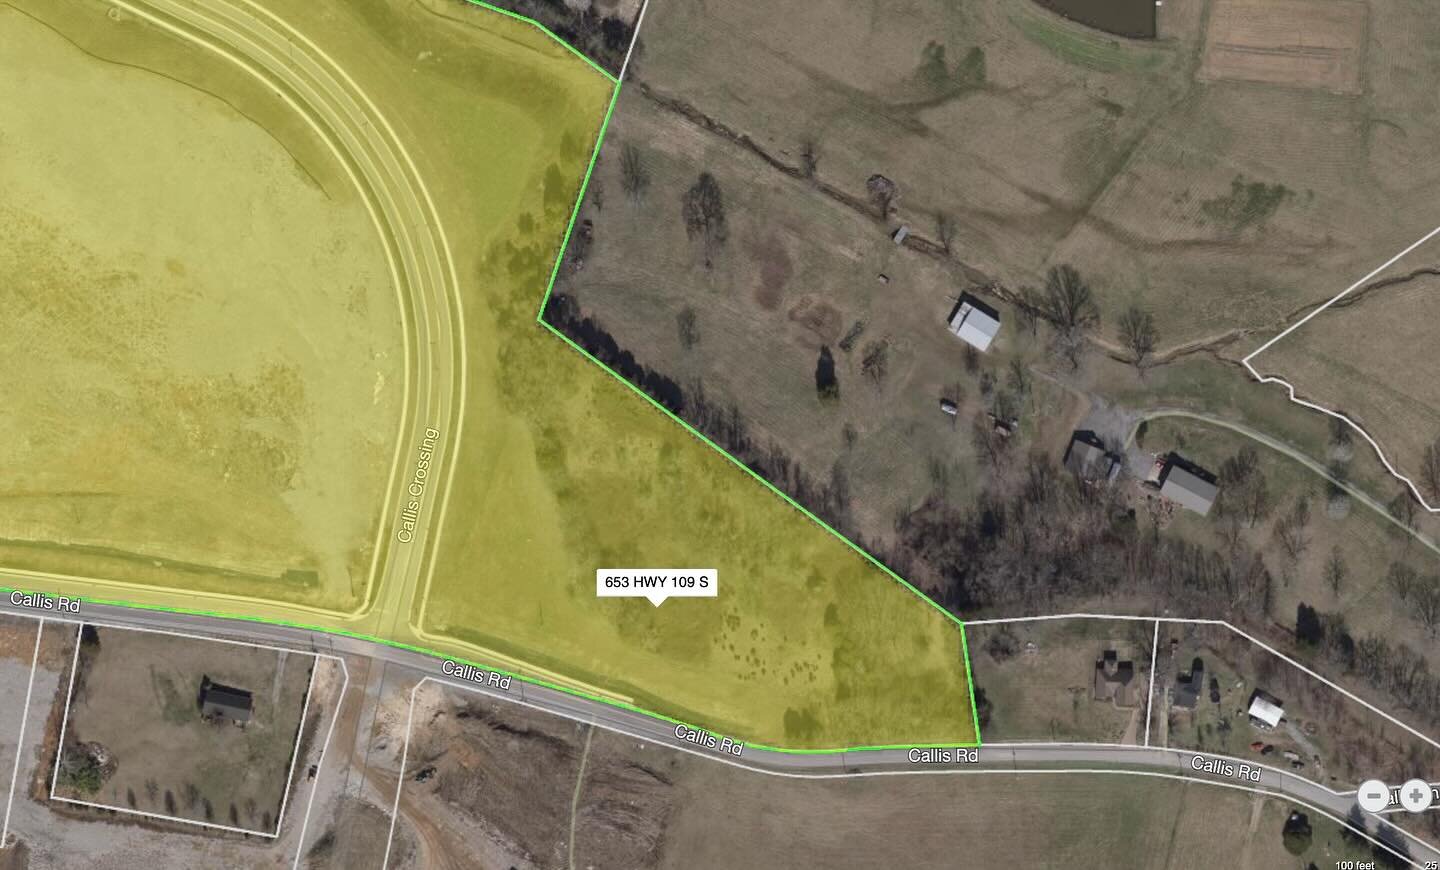 Our client closed on just over 5 acres of commercial land in Lebanon, TN yesterday. Feels good to have this one be official! ✅ 

#commercialland #commercialrealestate #lebanontn #middletn